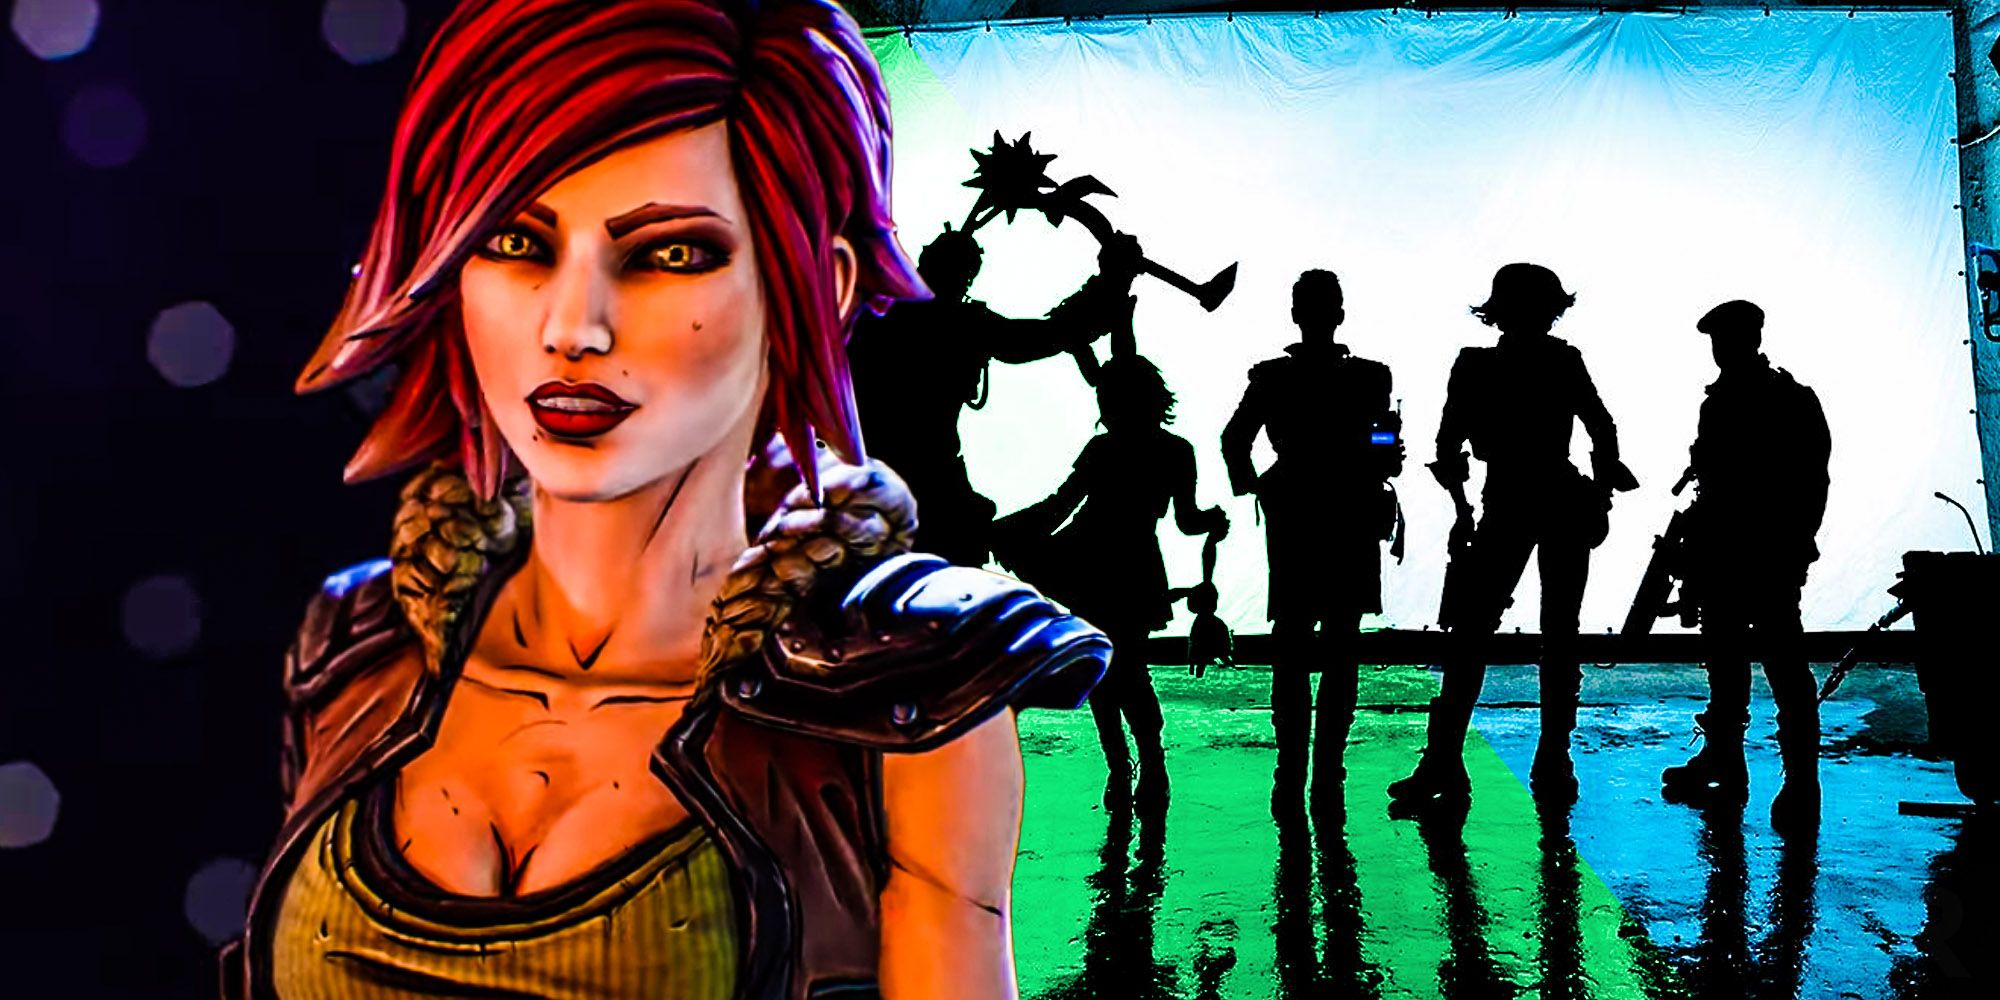 Borderlands lilith What The Cast Look Like in The Film Vs The Game